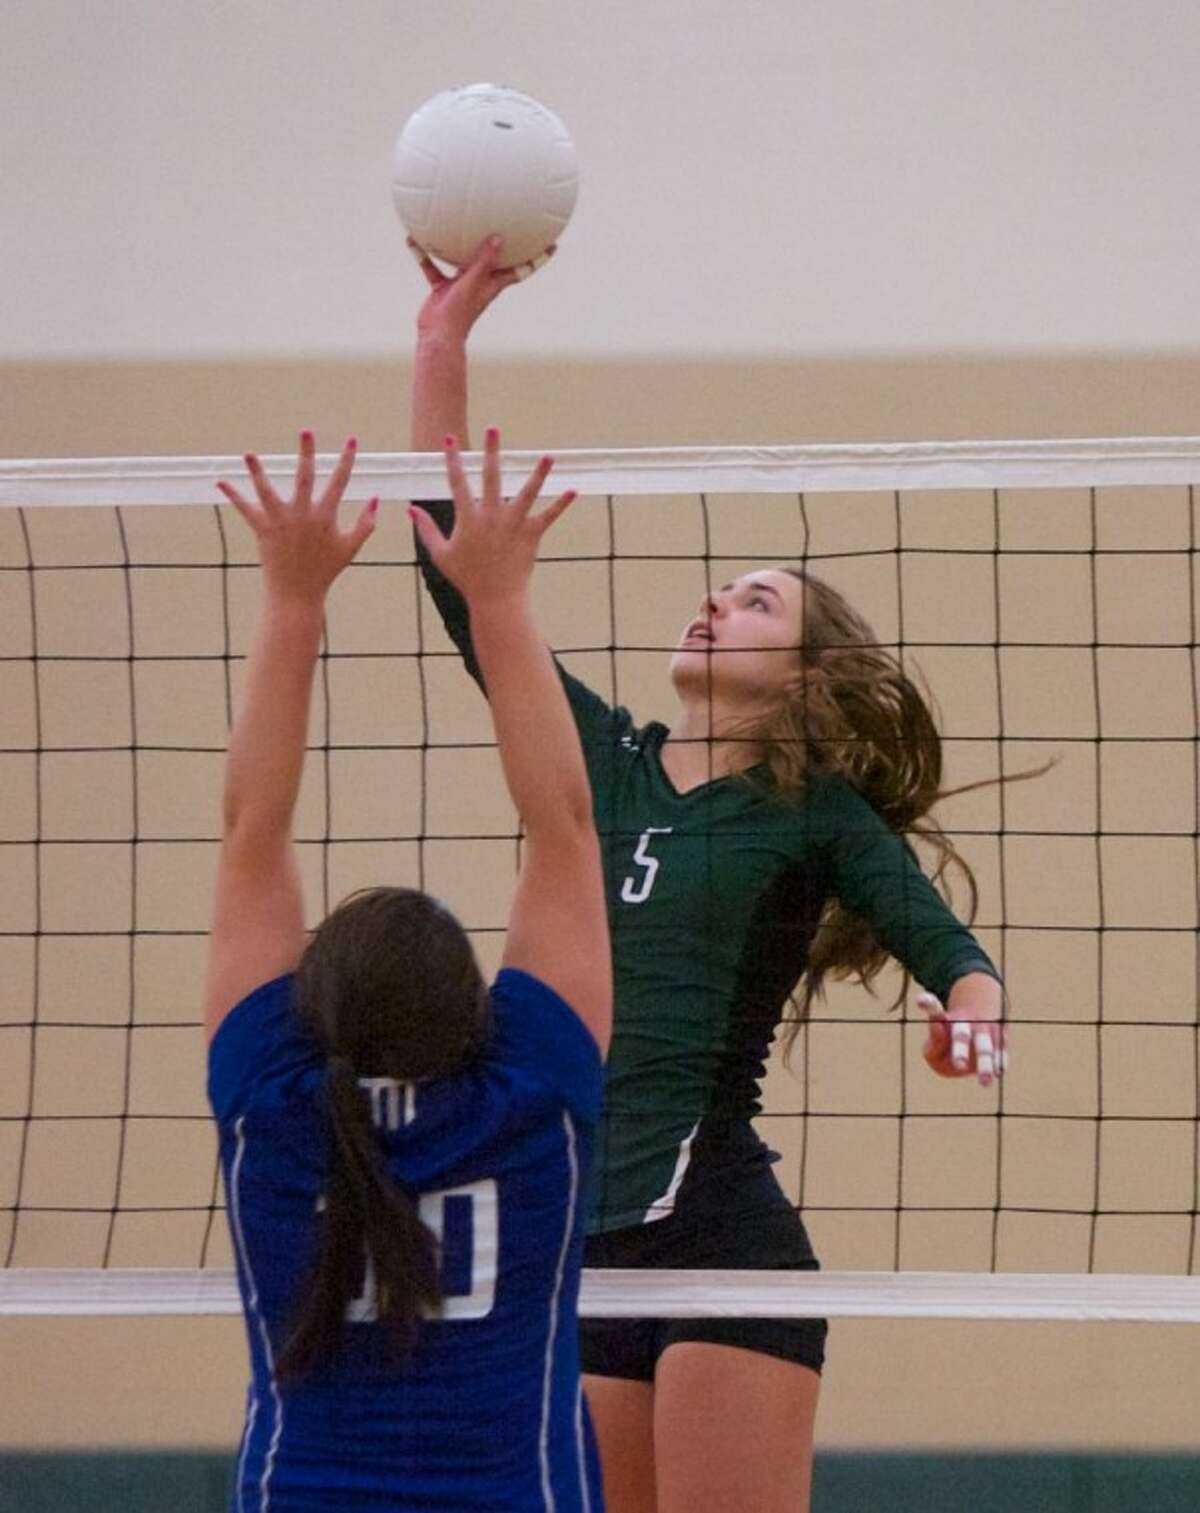 The John Cooper School’s Margaret Connett goes up for a spike during Wednesday night’s match against Lutheran North in The Woodlands.